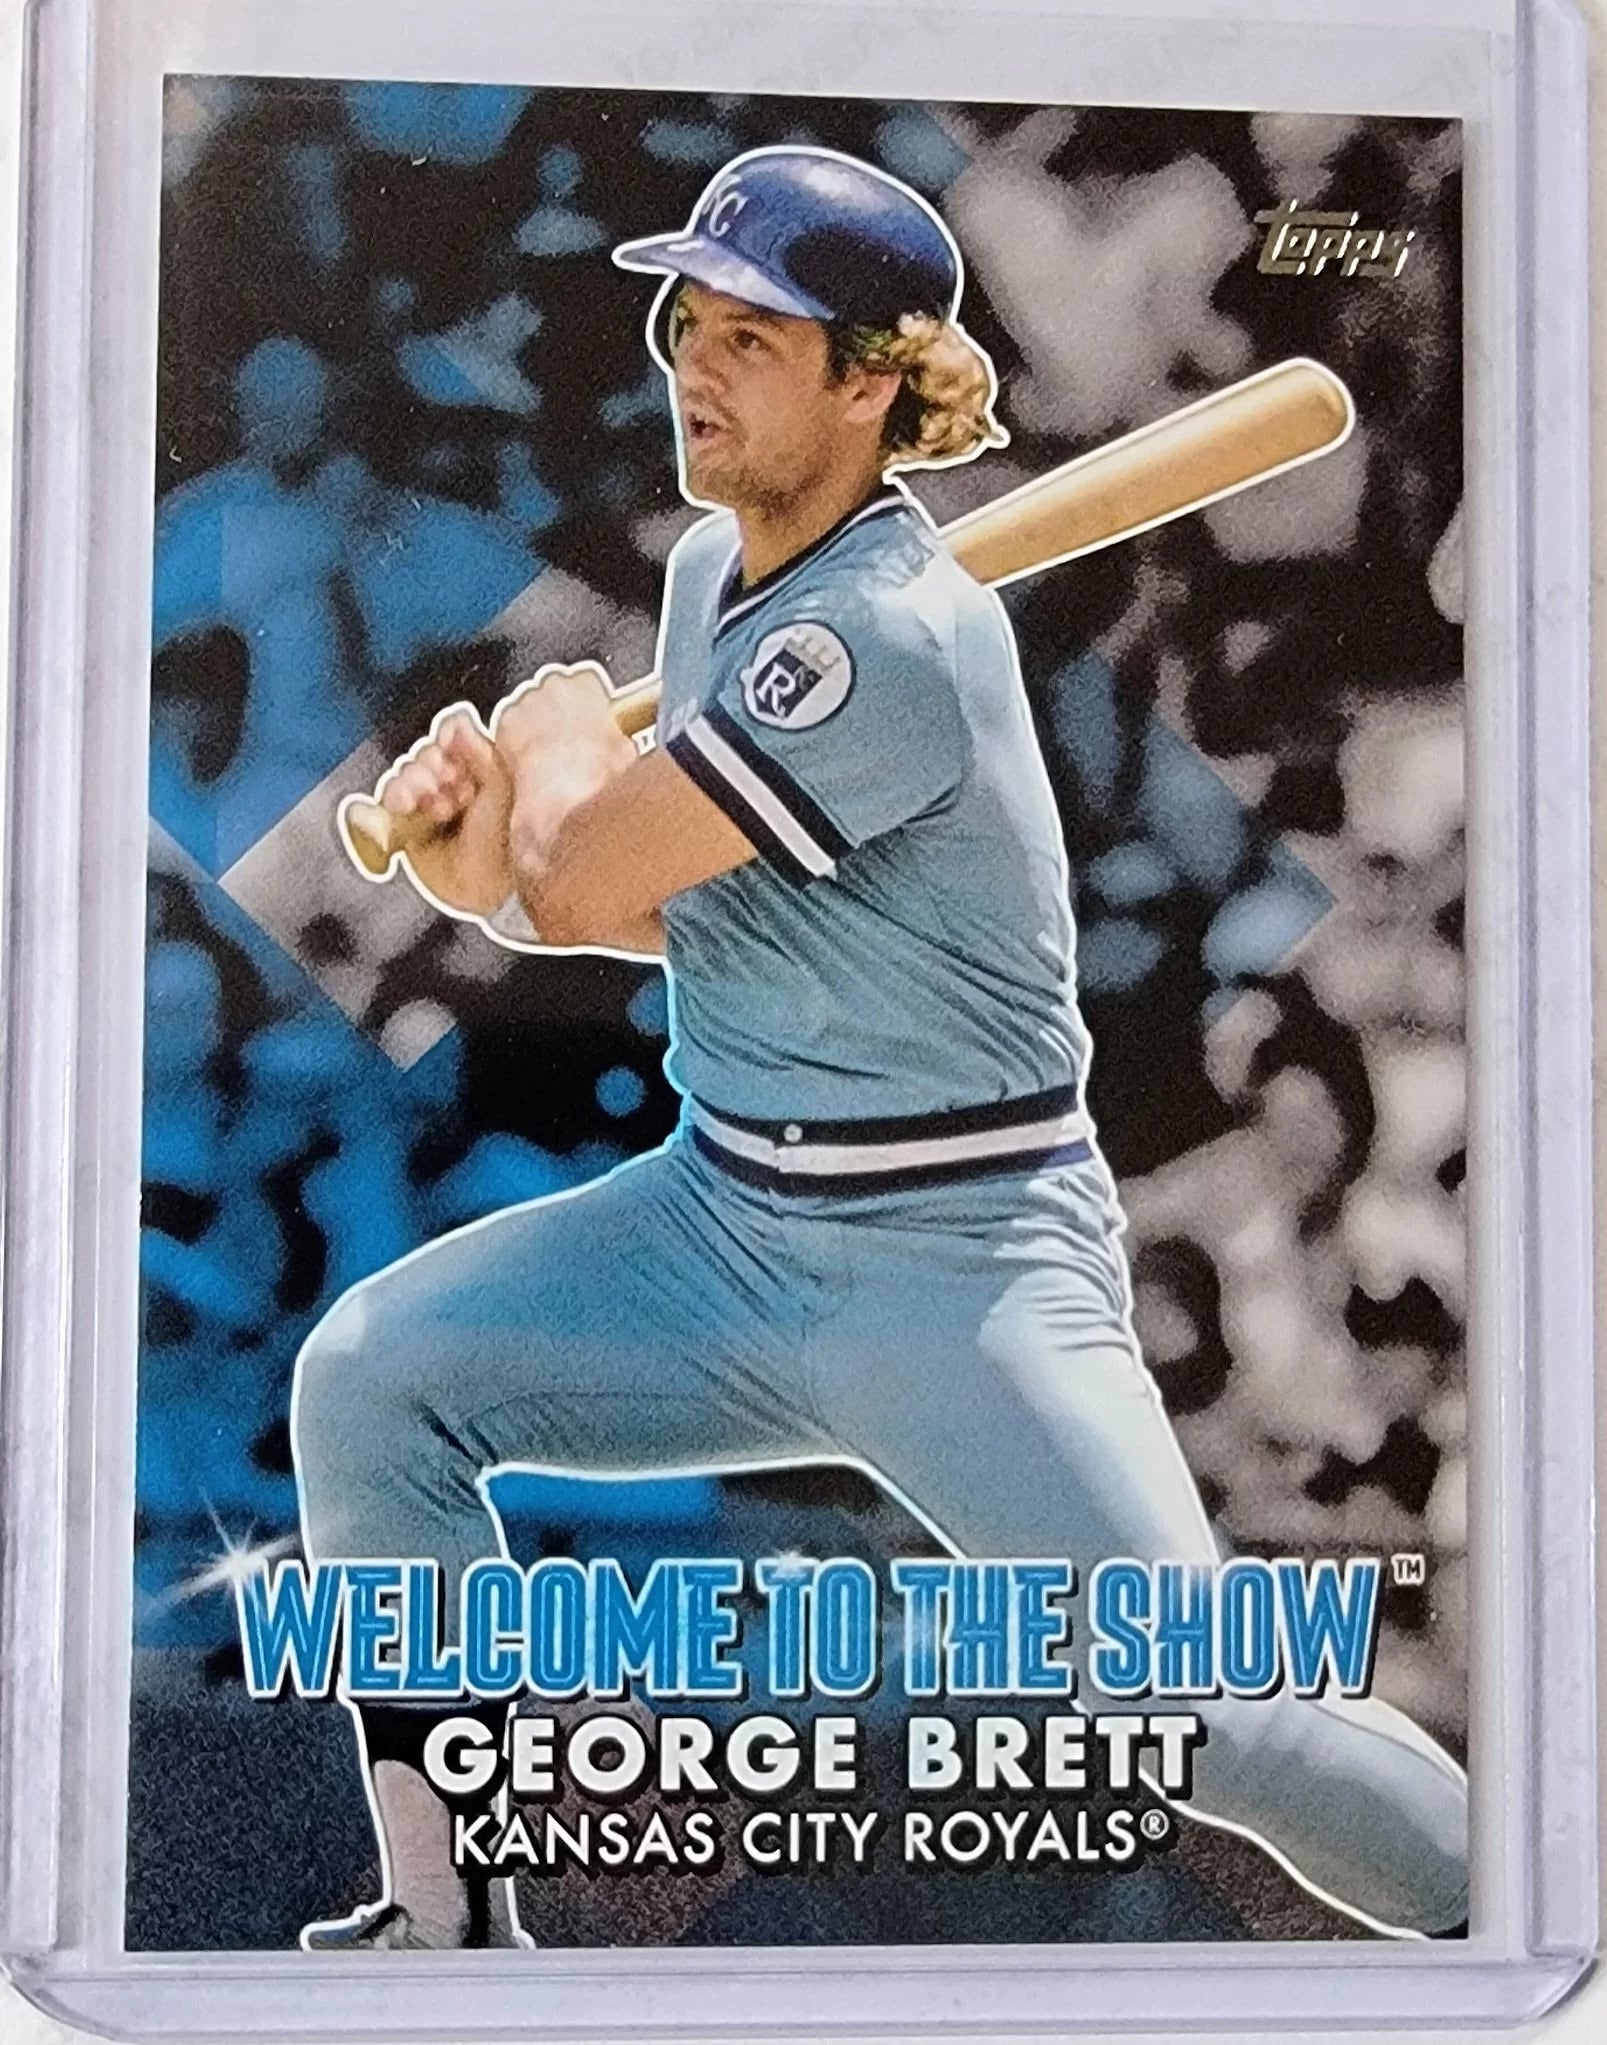 2022 Topps George Brett Welcome to the Show Baseball Trading Card GRB1 simple Xclusive Collectibles   